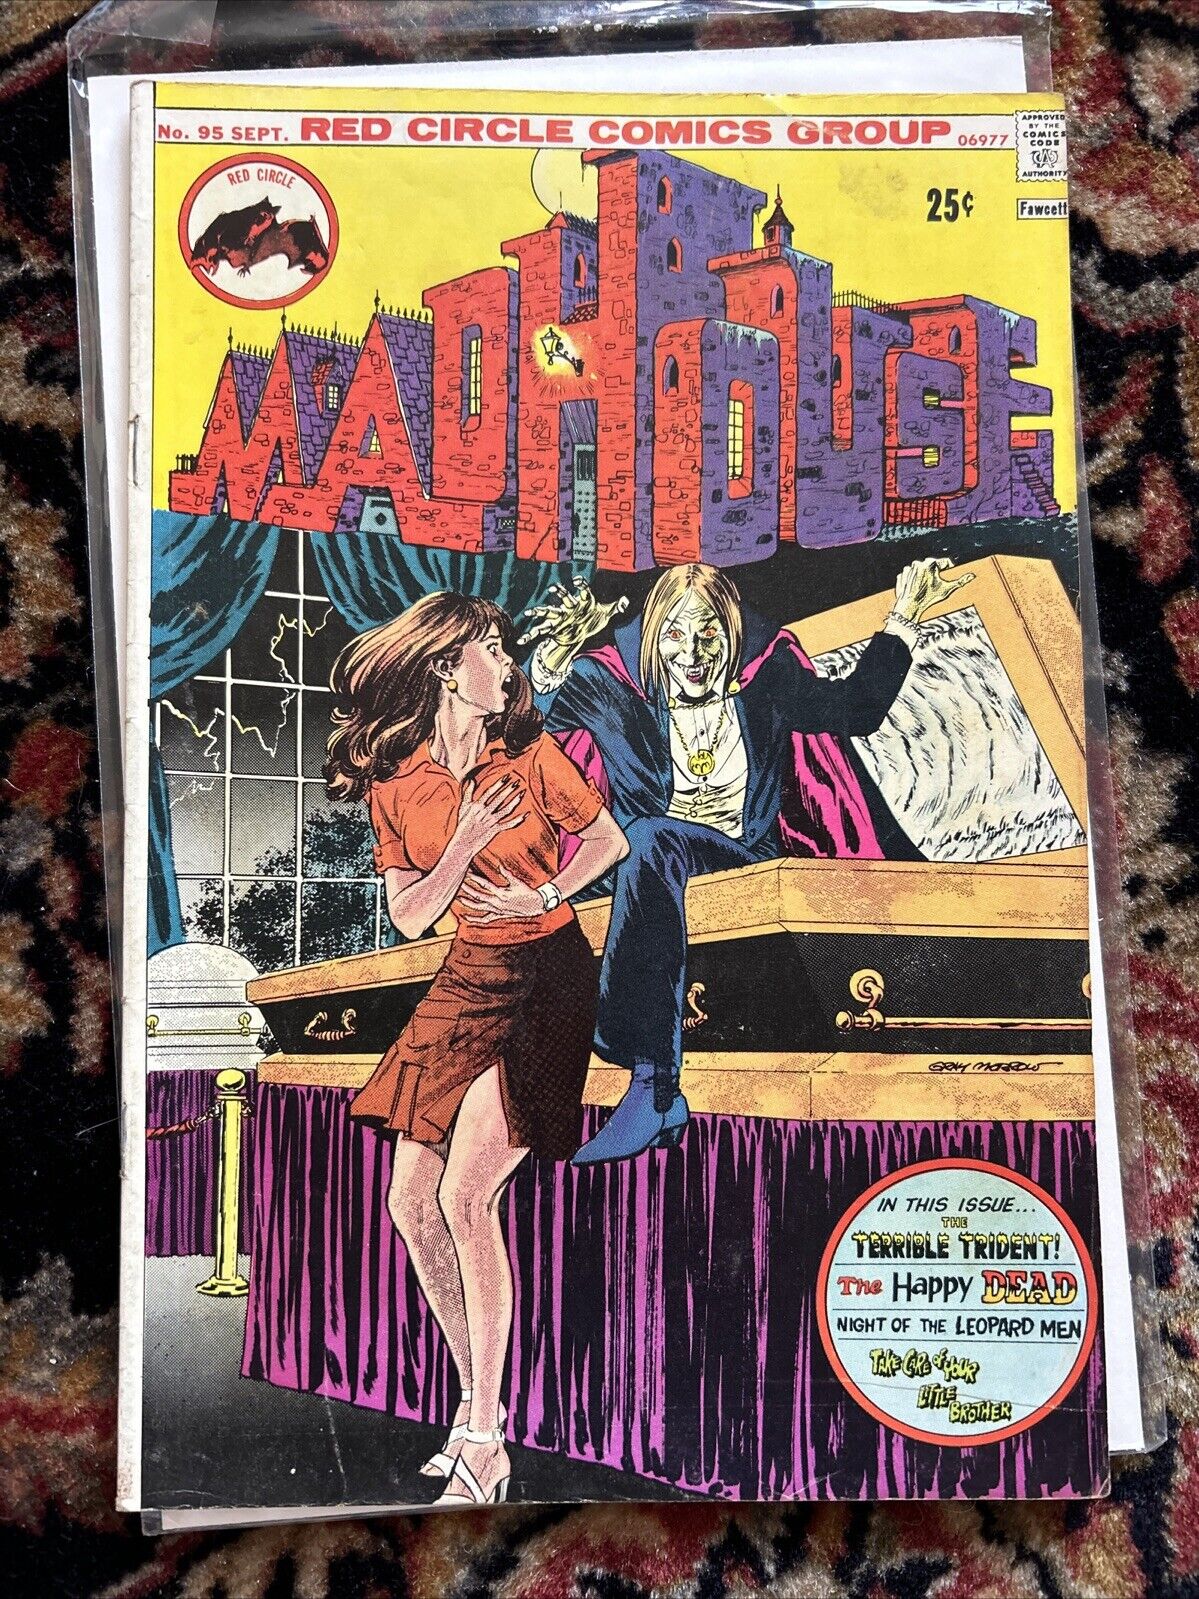 Madhouse #95 (Red Circle Comics Group 1974) VG+ Bronze Age Horror Vampires